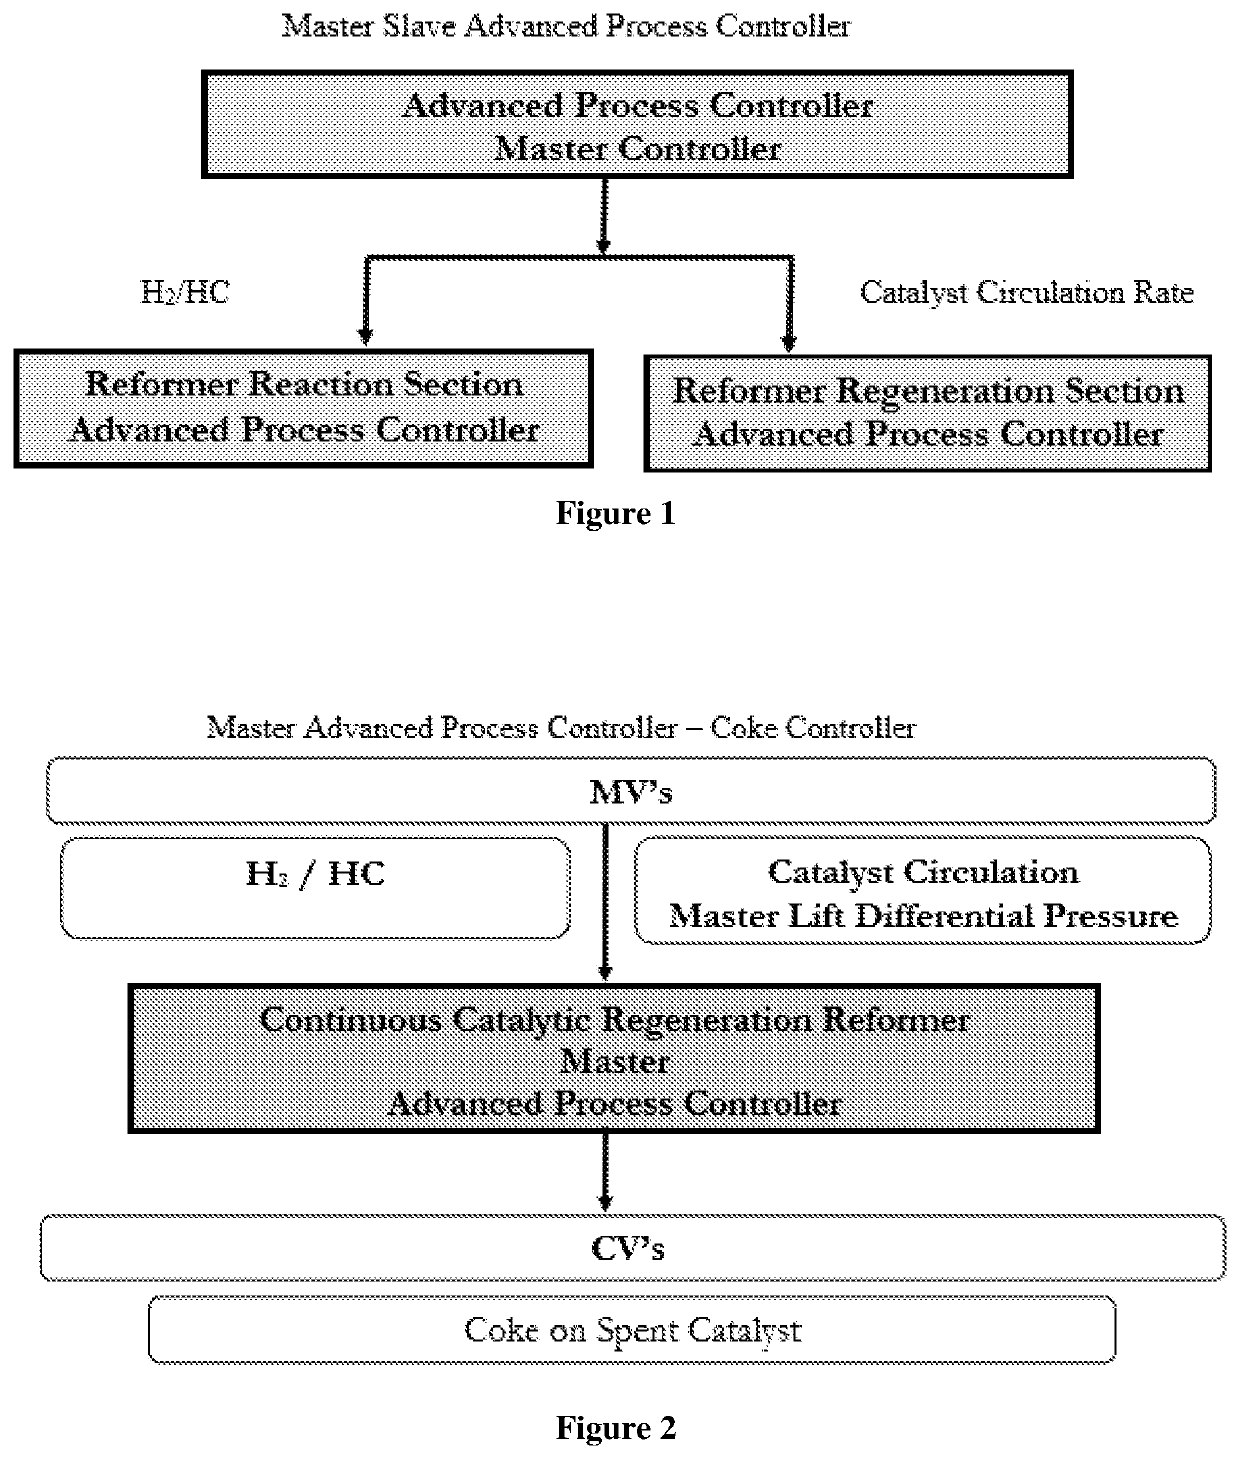 Advanced process control in a continuous catalytic regeneration reformer